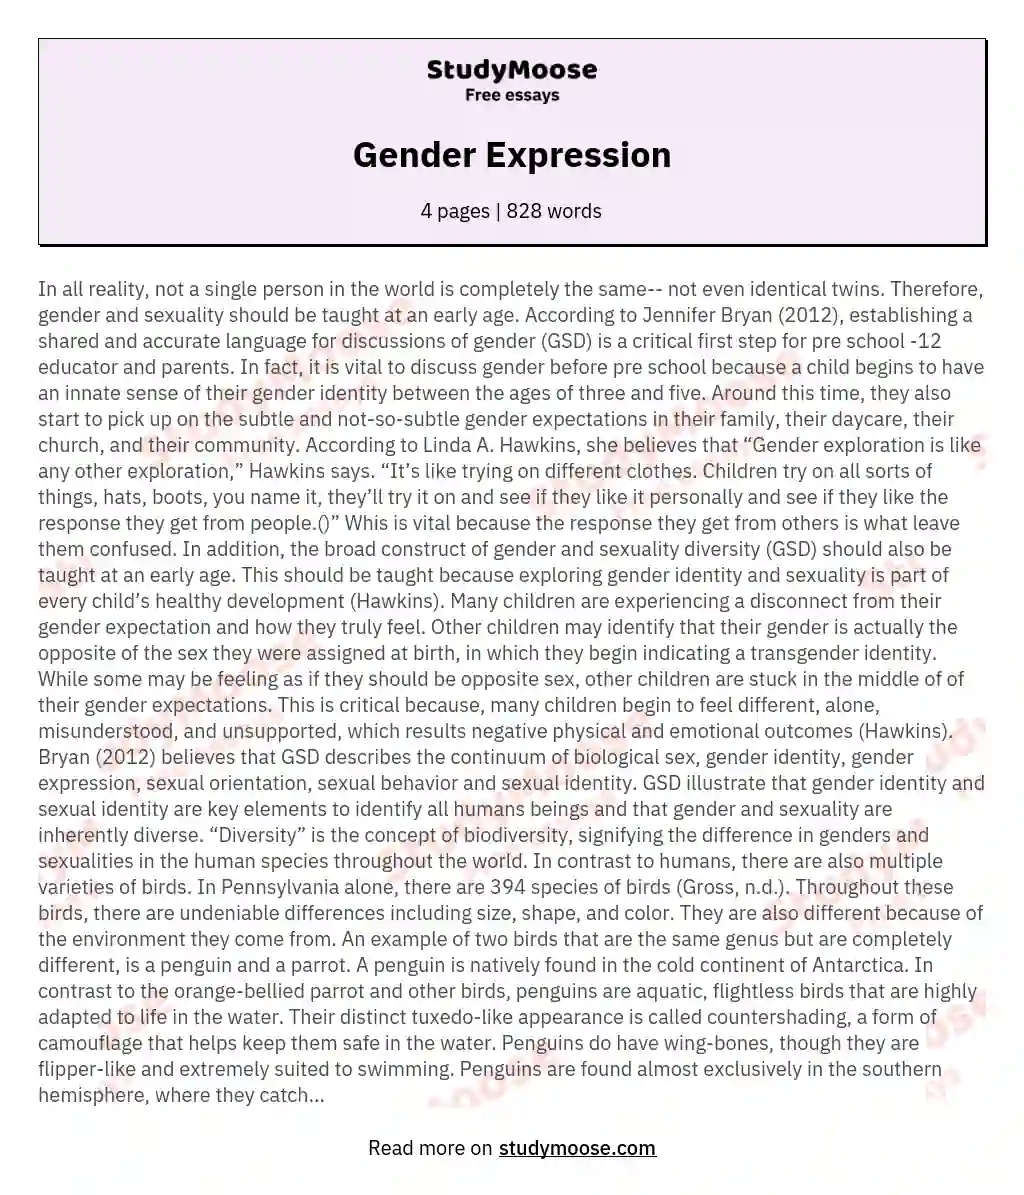 what is your gender expression essay